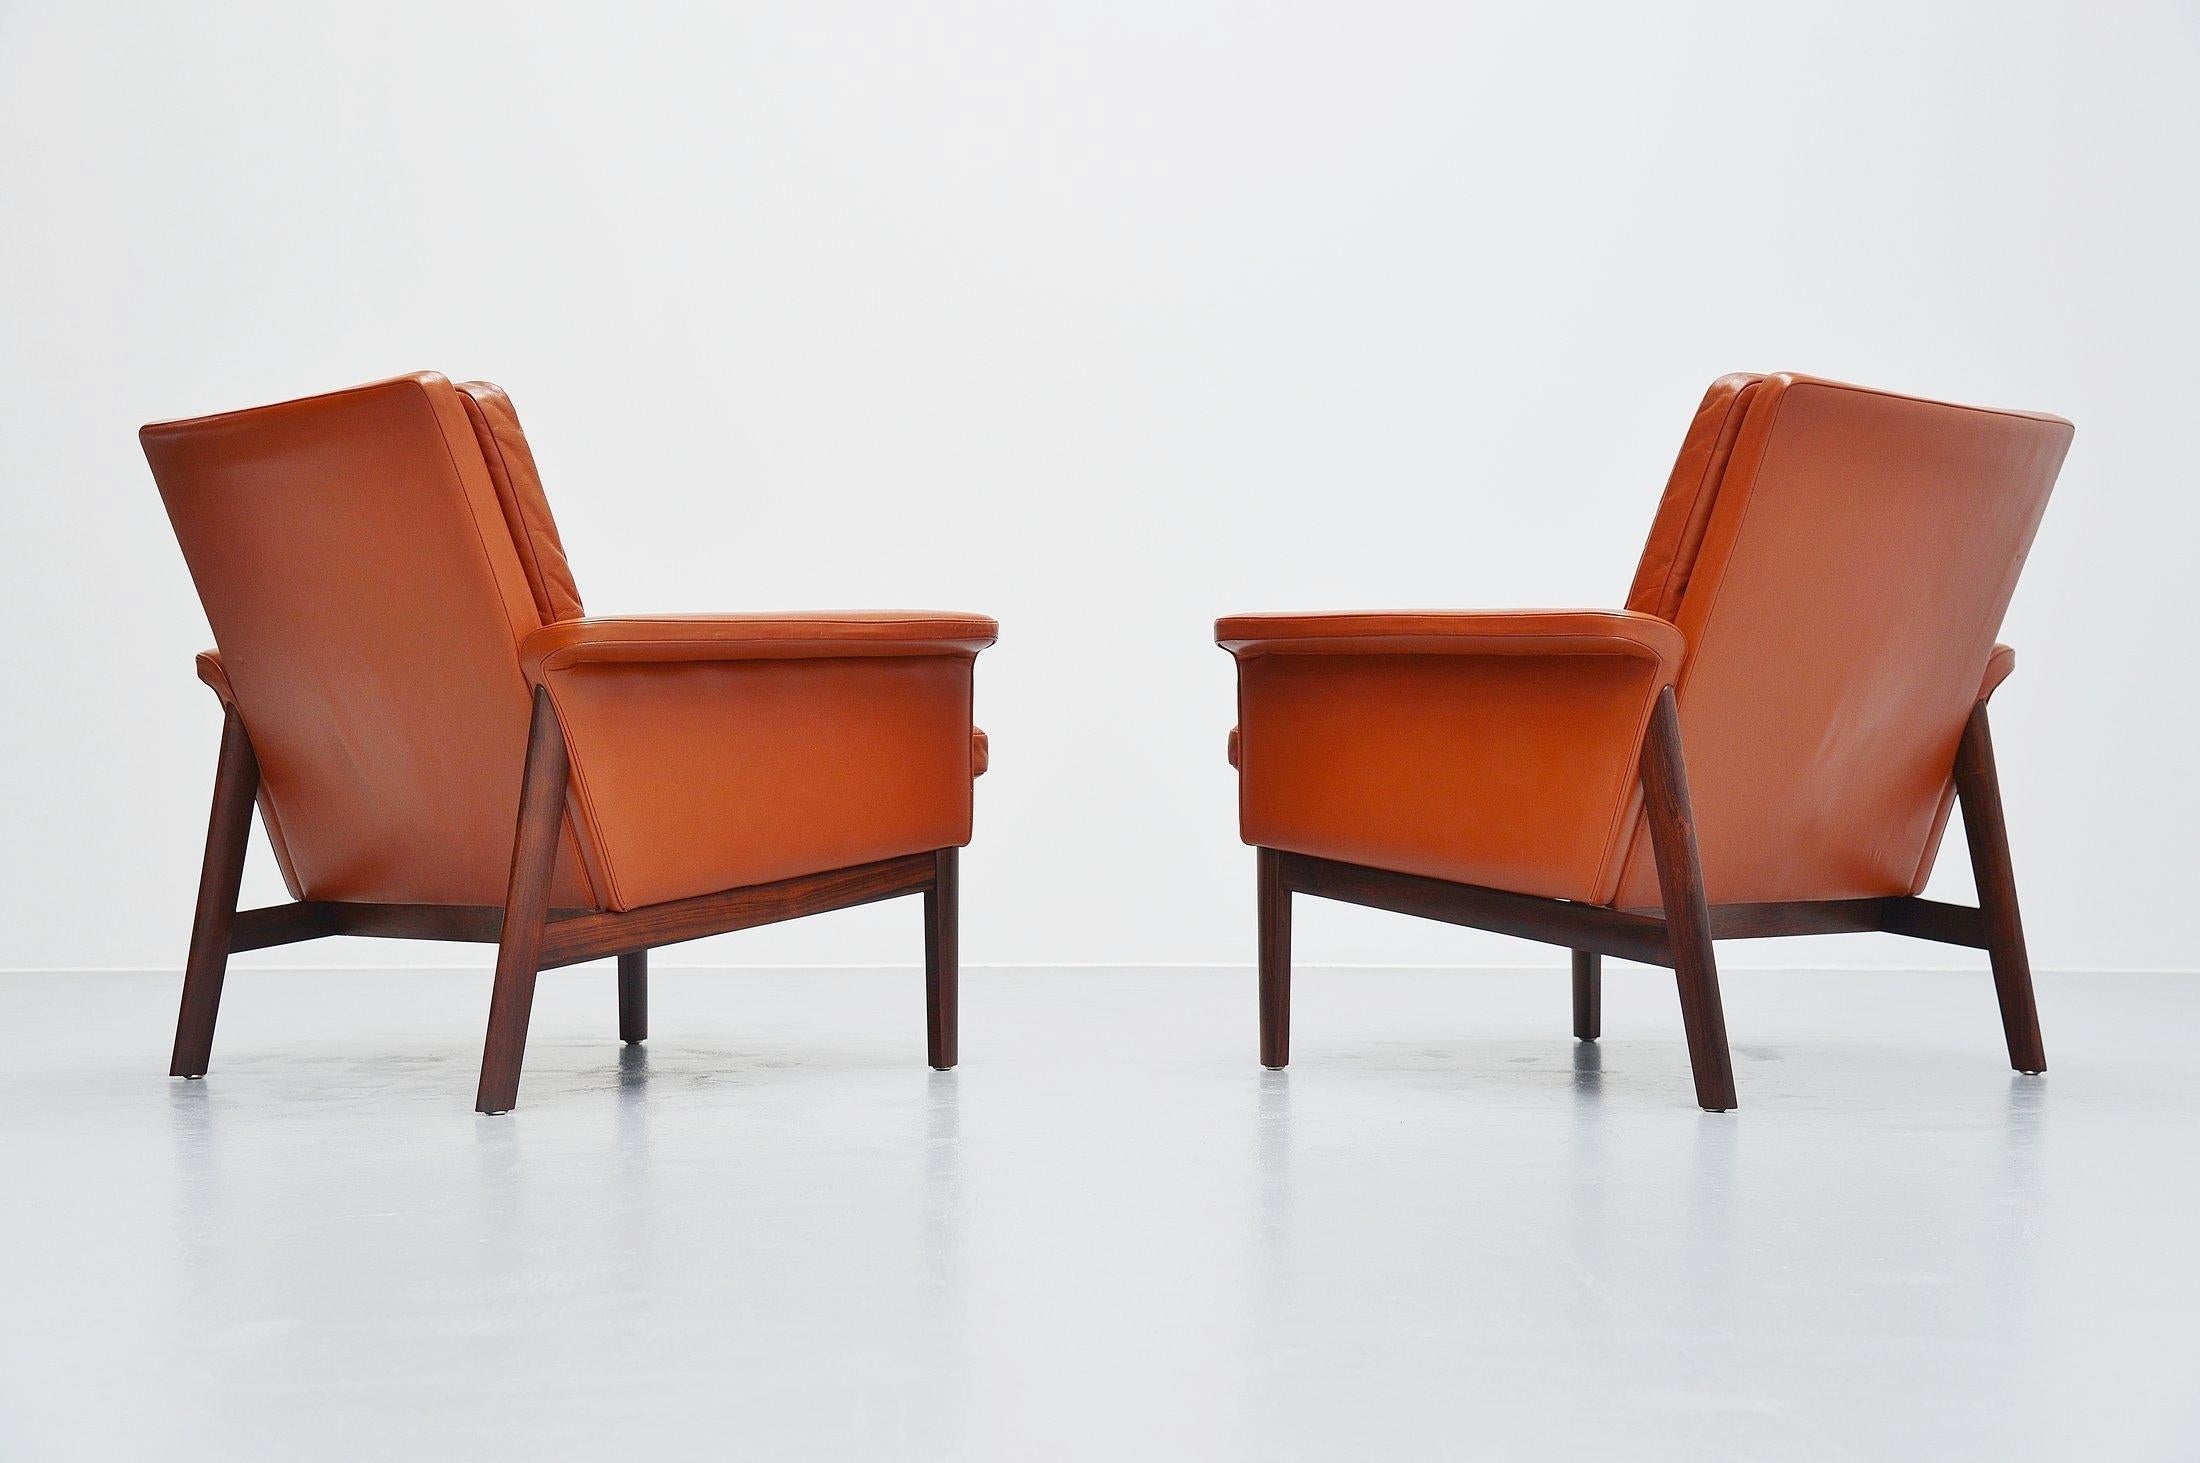 Subtle modern so called Jupiter lounge chairs model 218 designed by Finn Juhl and manufactured by France and Son, Denmark 1965. This set of chairs has a solid rosewood frame and cognac leather seting. The chairs are in fully original and very good